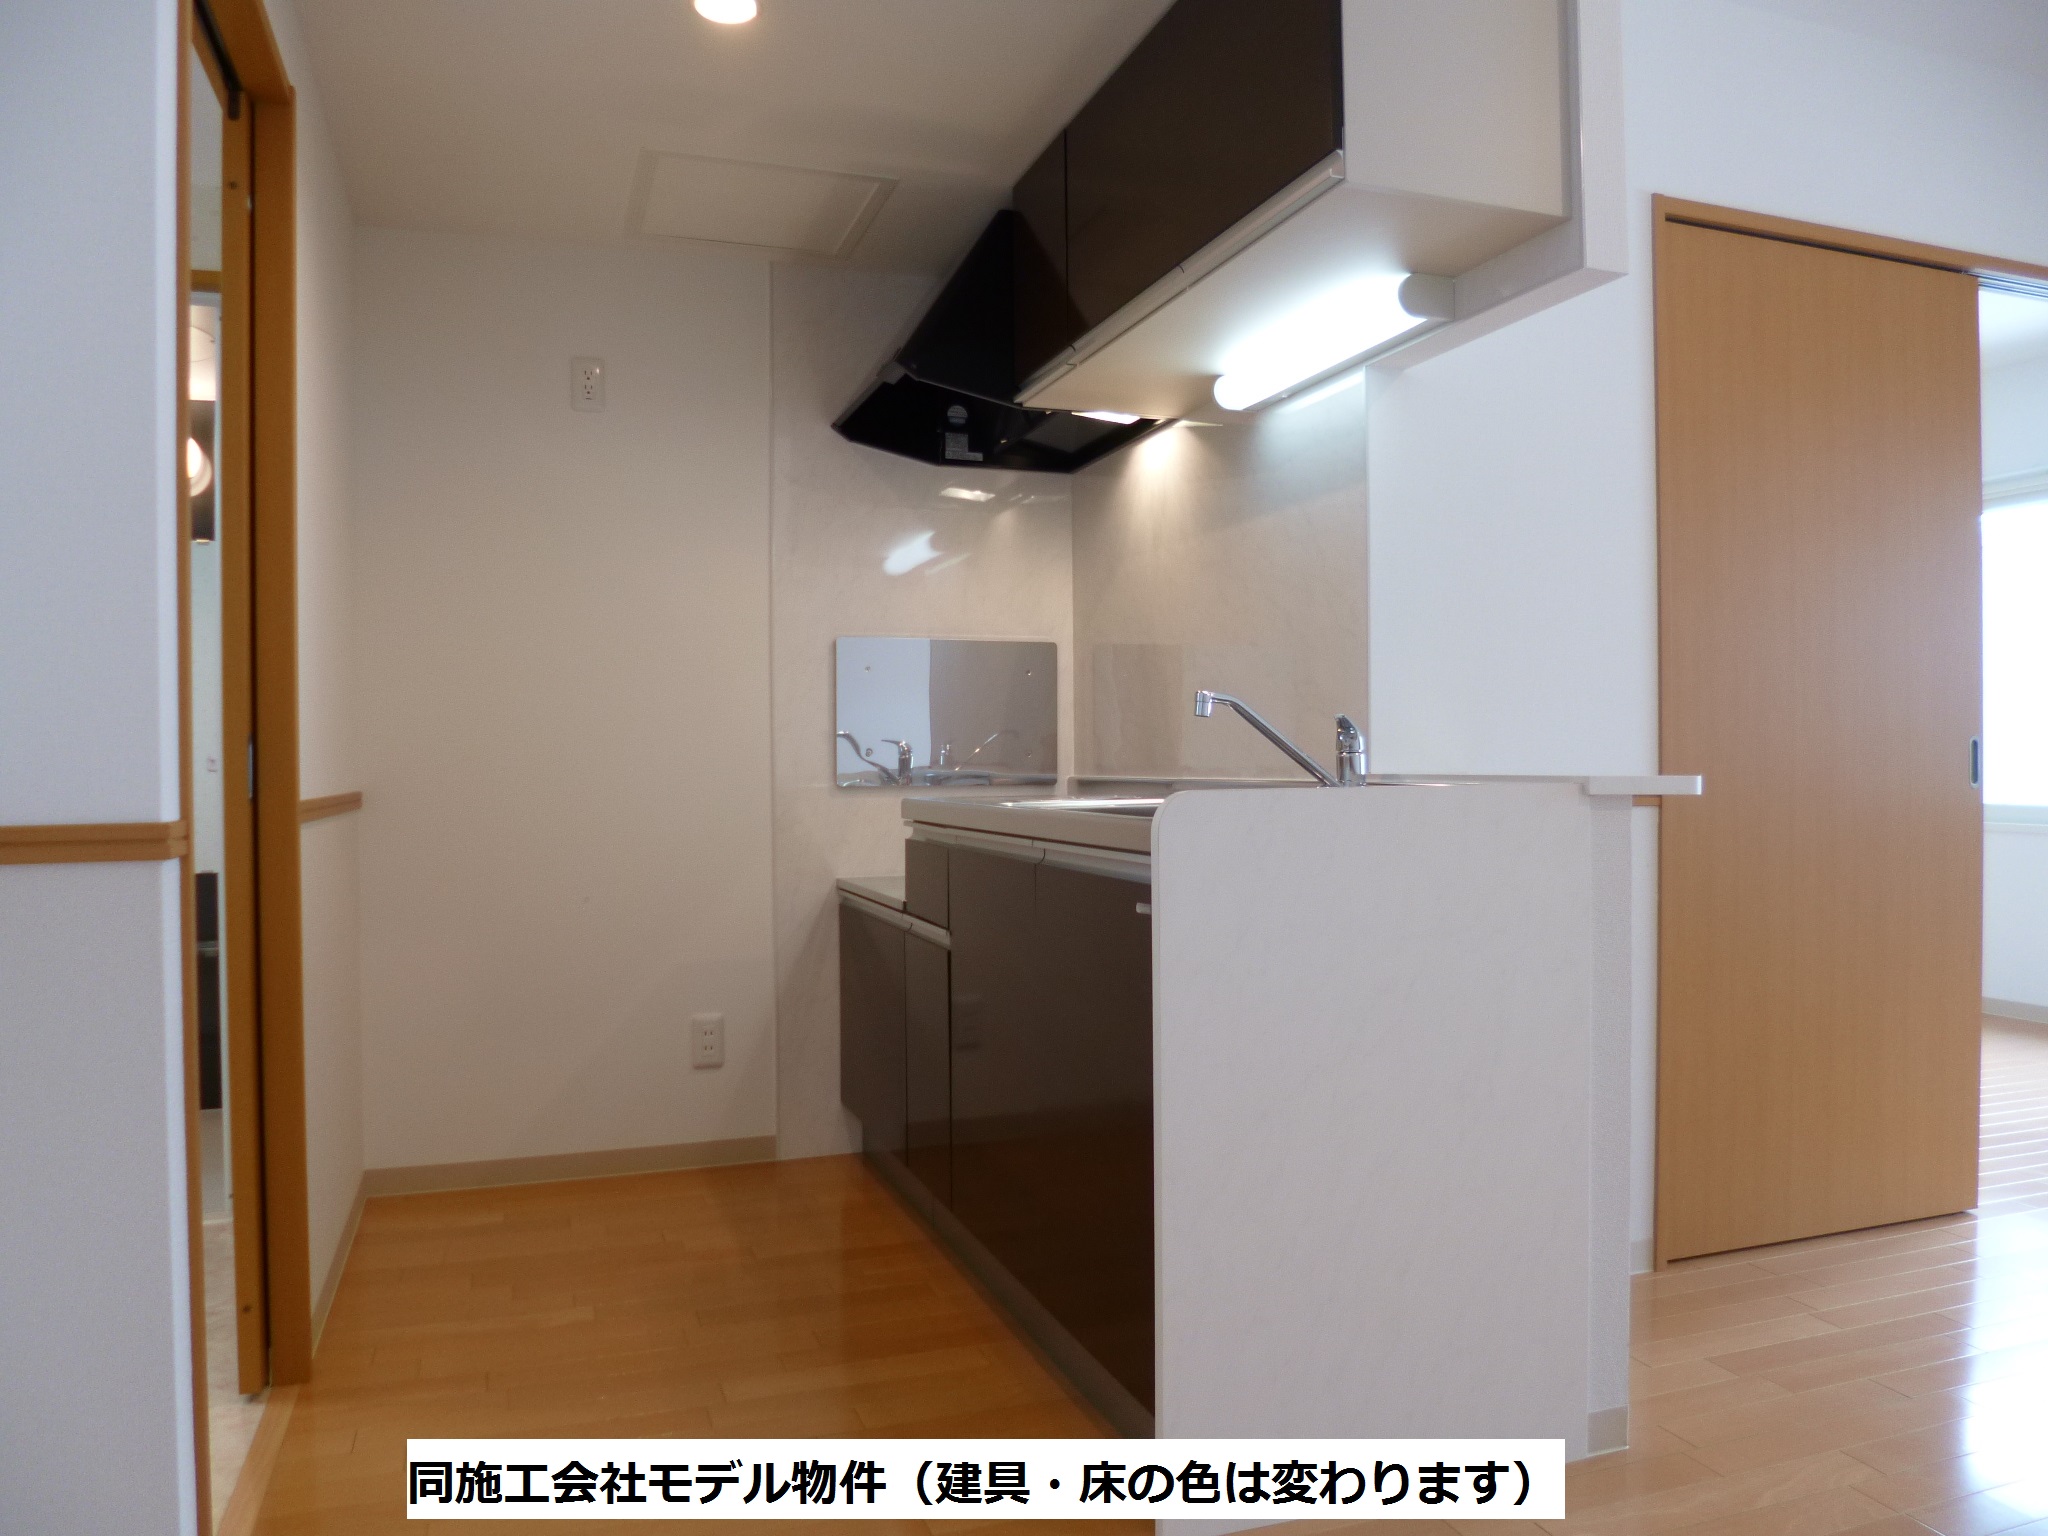 Kitchen. Same construction company model properties Joinery ・ The color of the floor will change